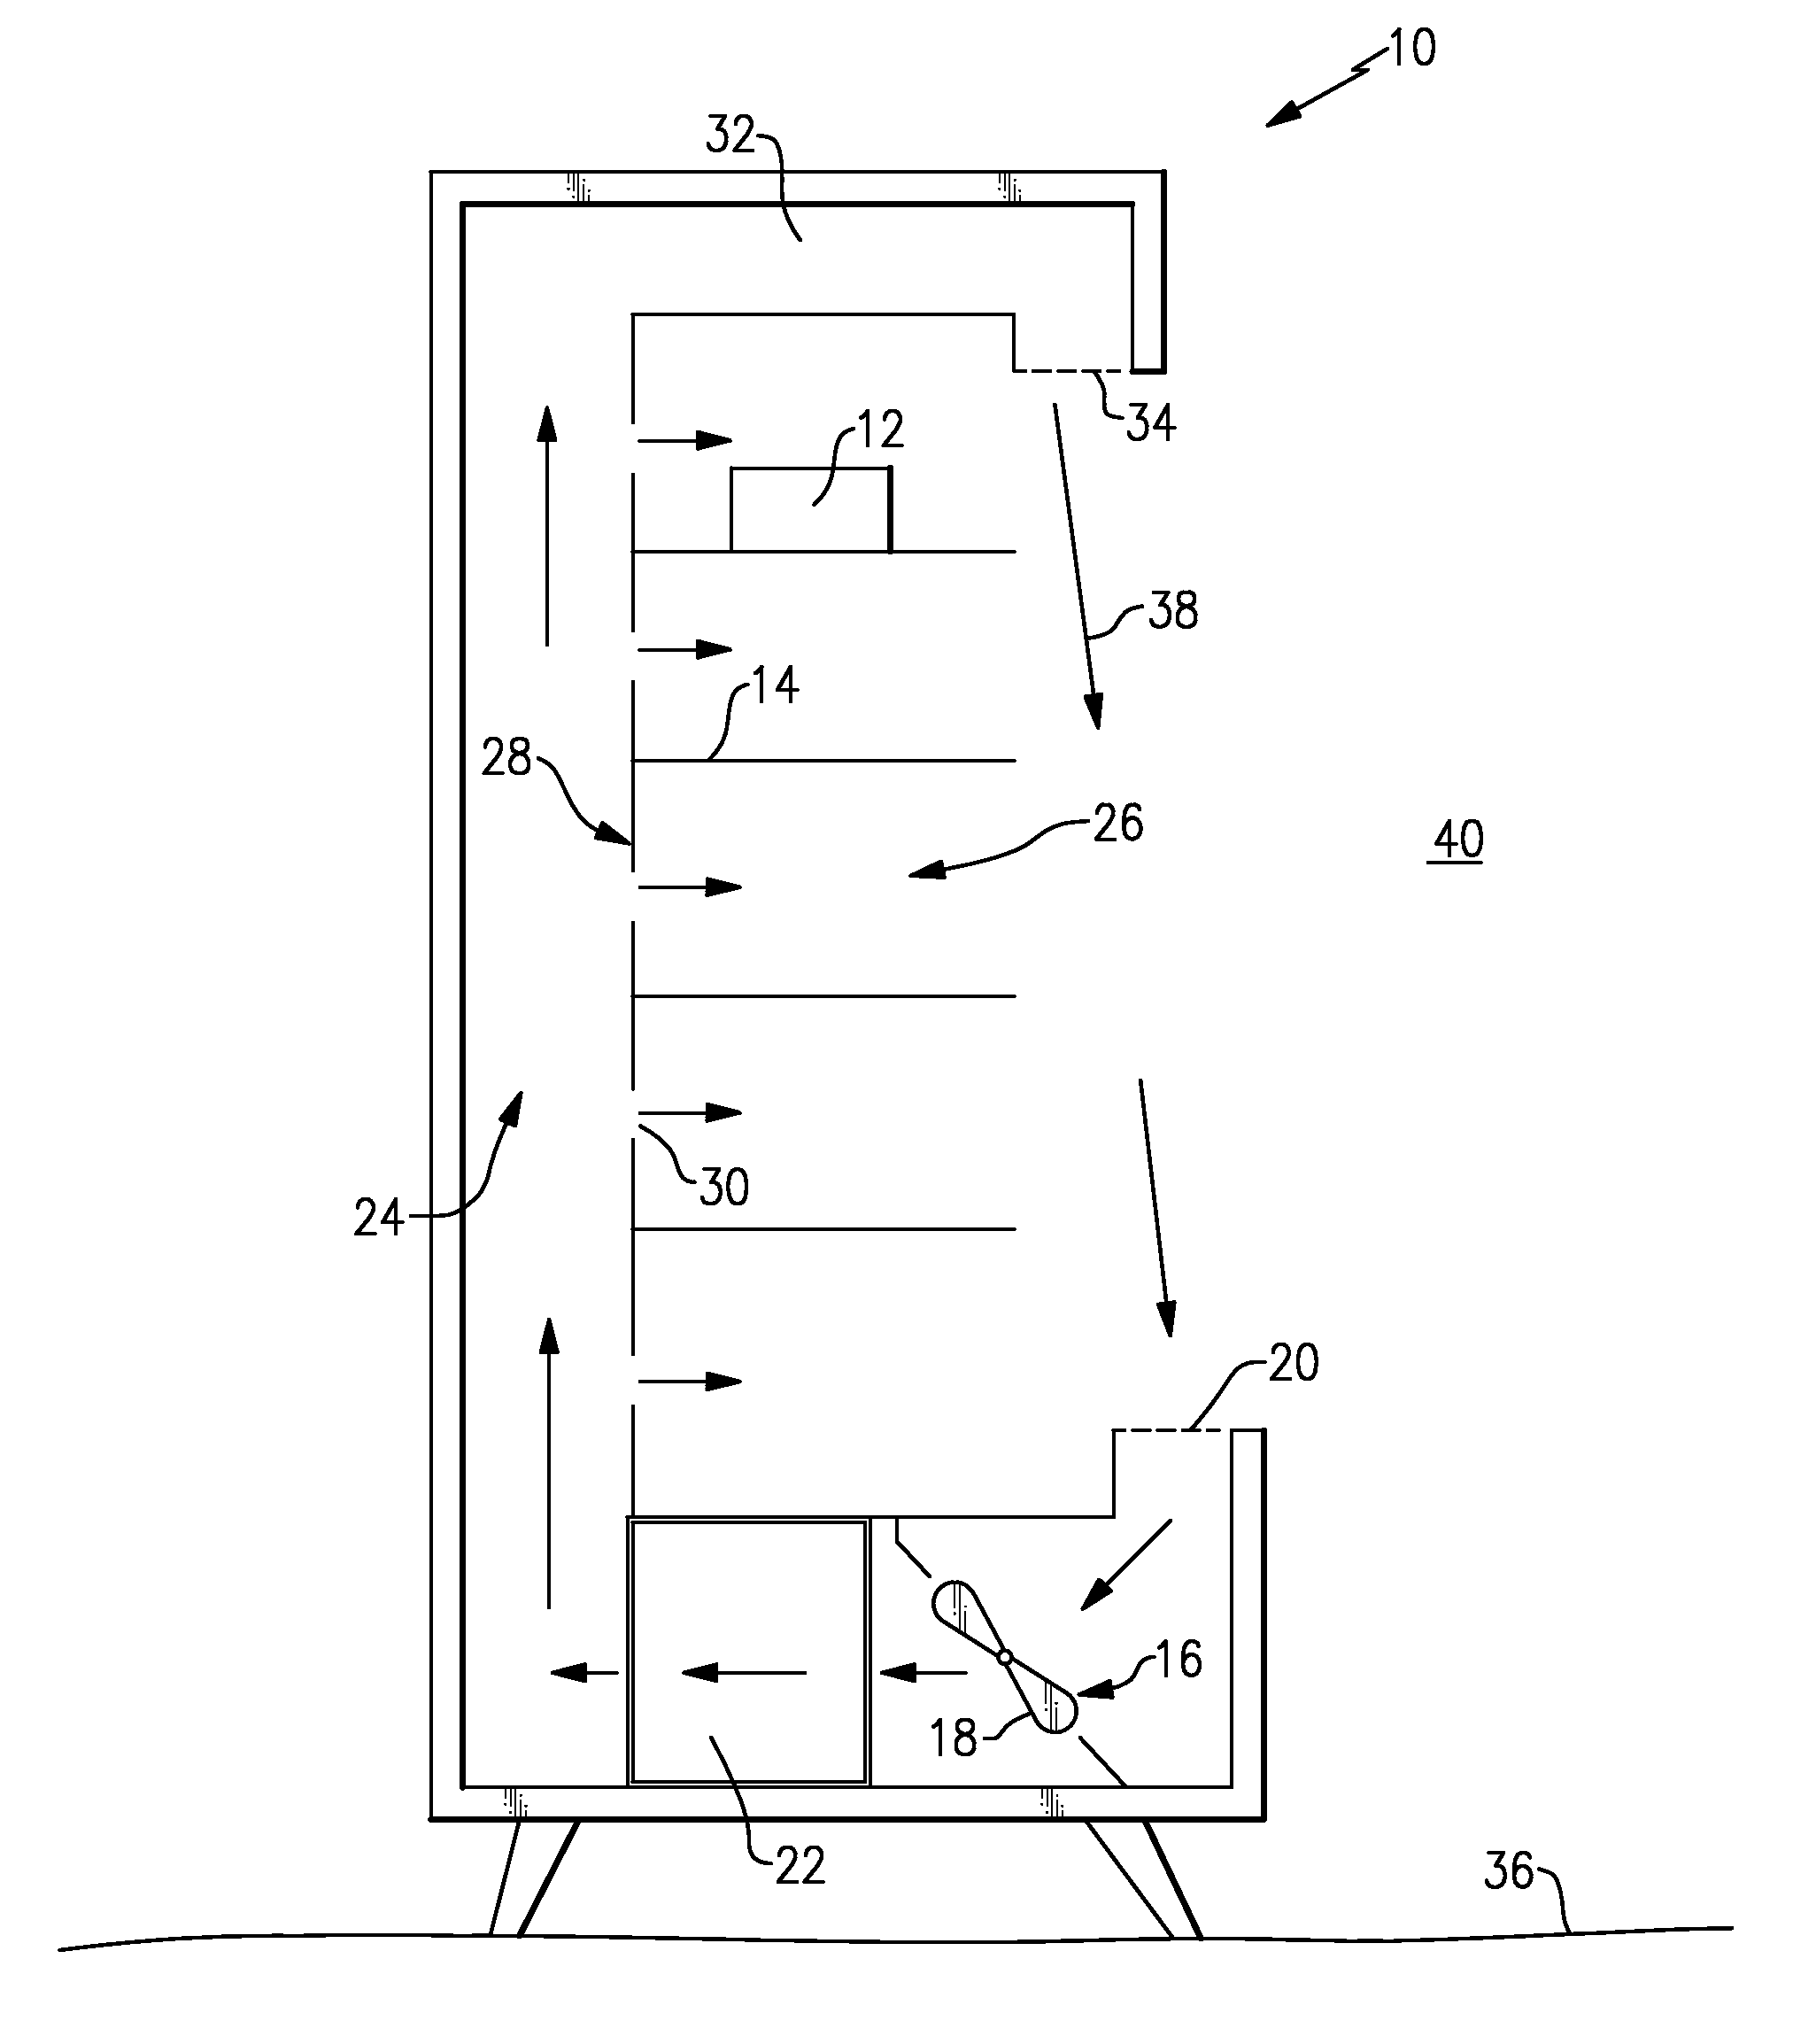 Display case including heat exchanger for reducing relative humidity